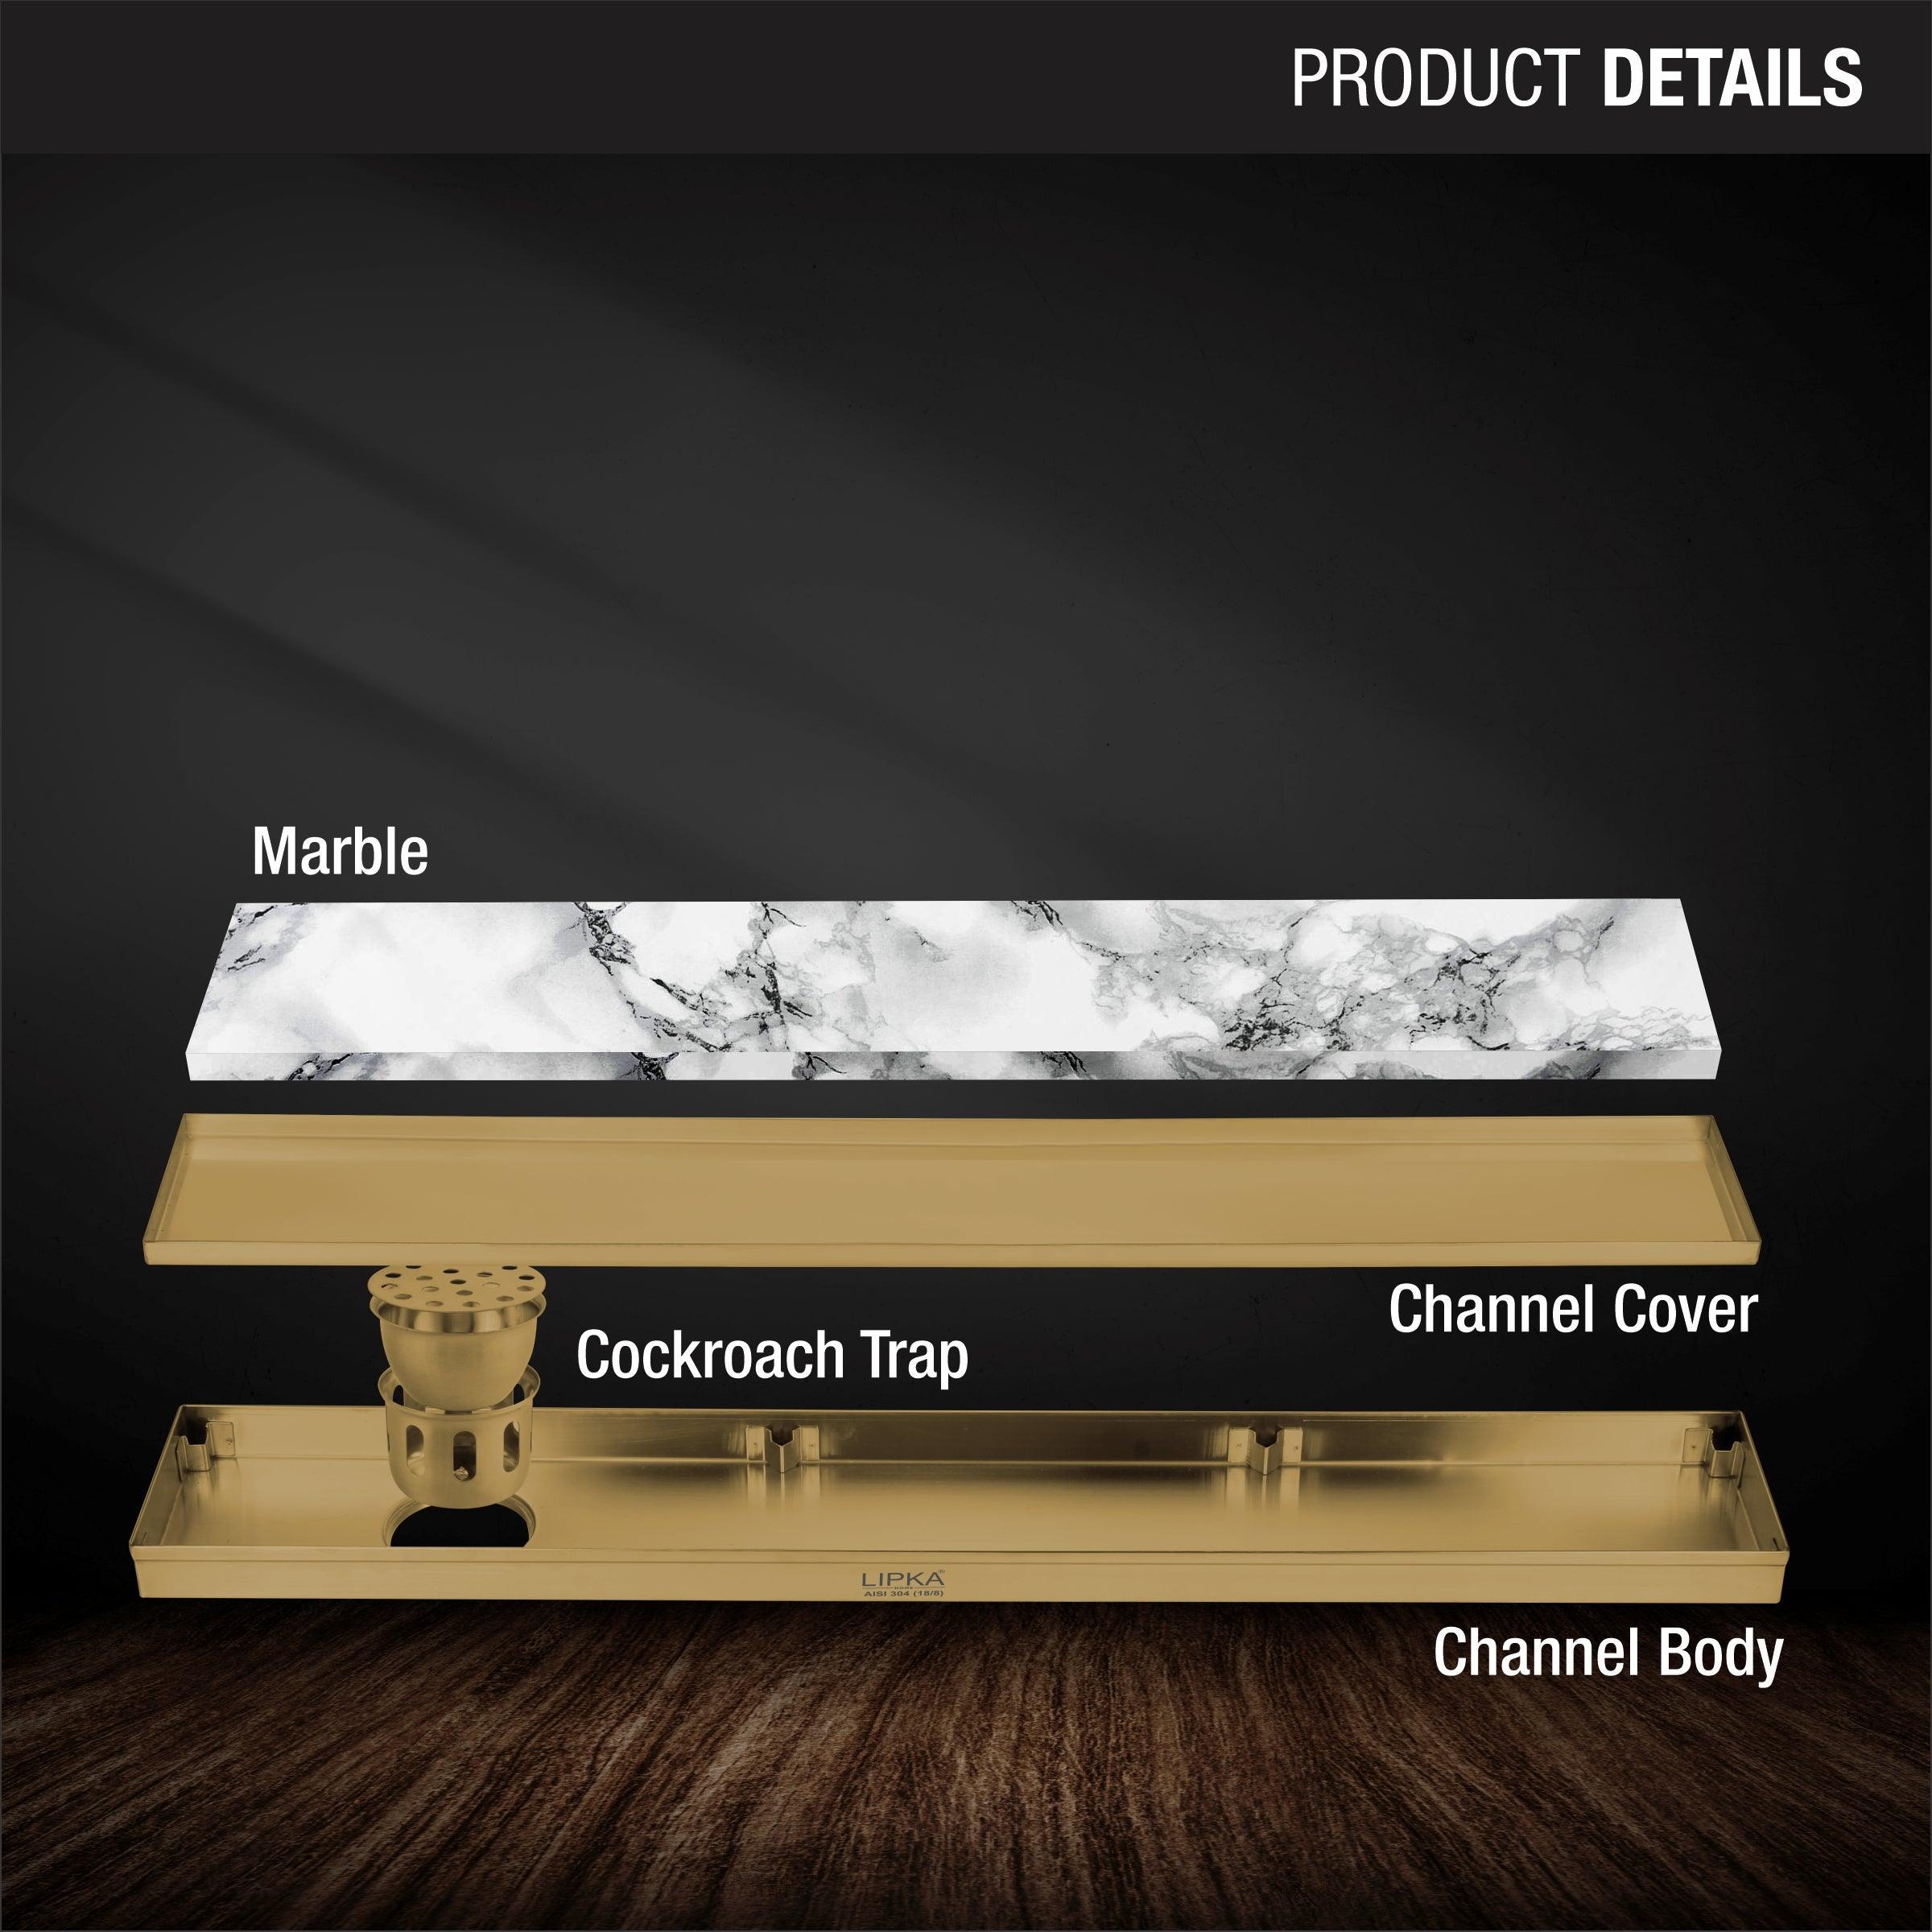 Marble Insert Shower Drain Channel - Yellow Gold (48 x 5 Inches) product details